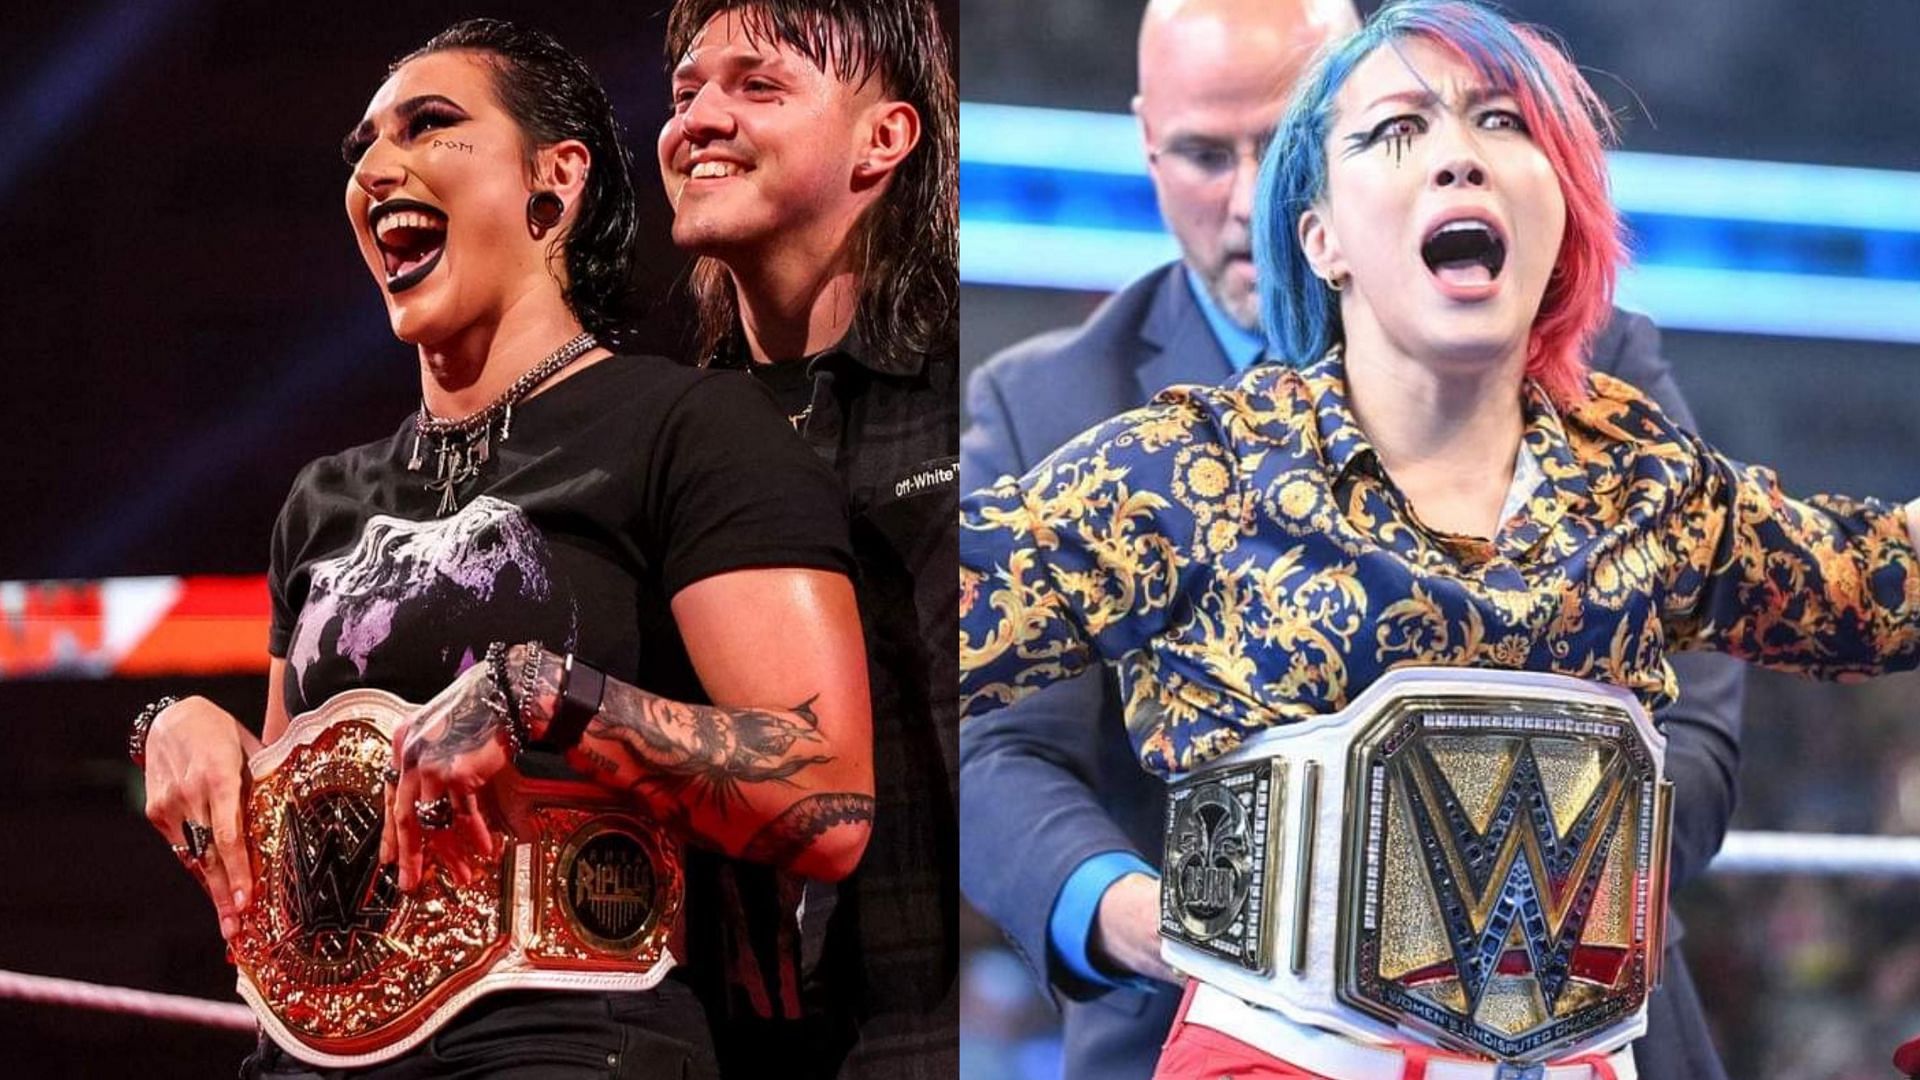 WWE have introduced two new Women